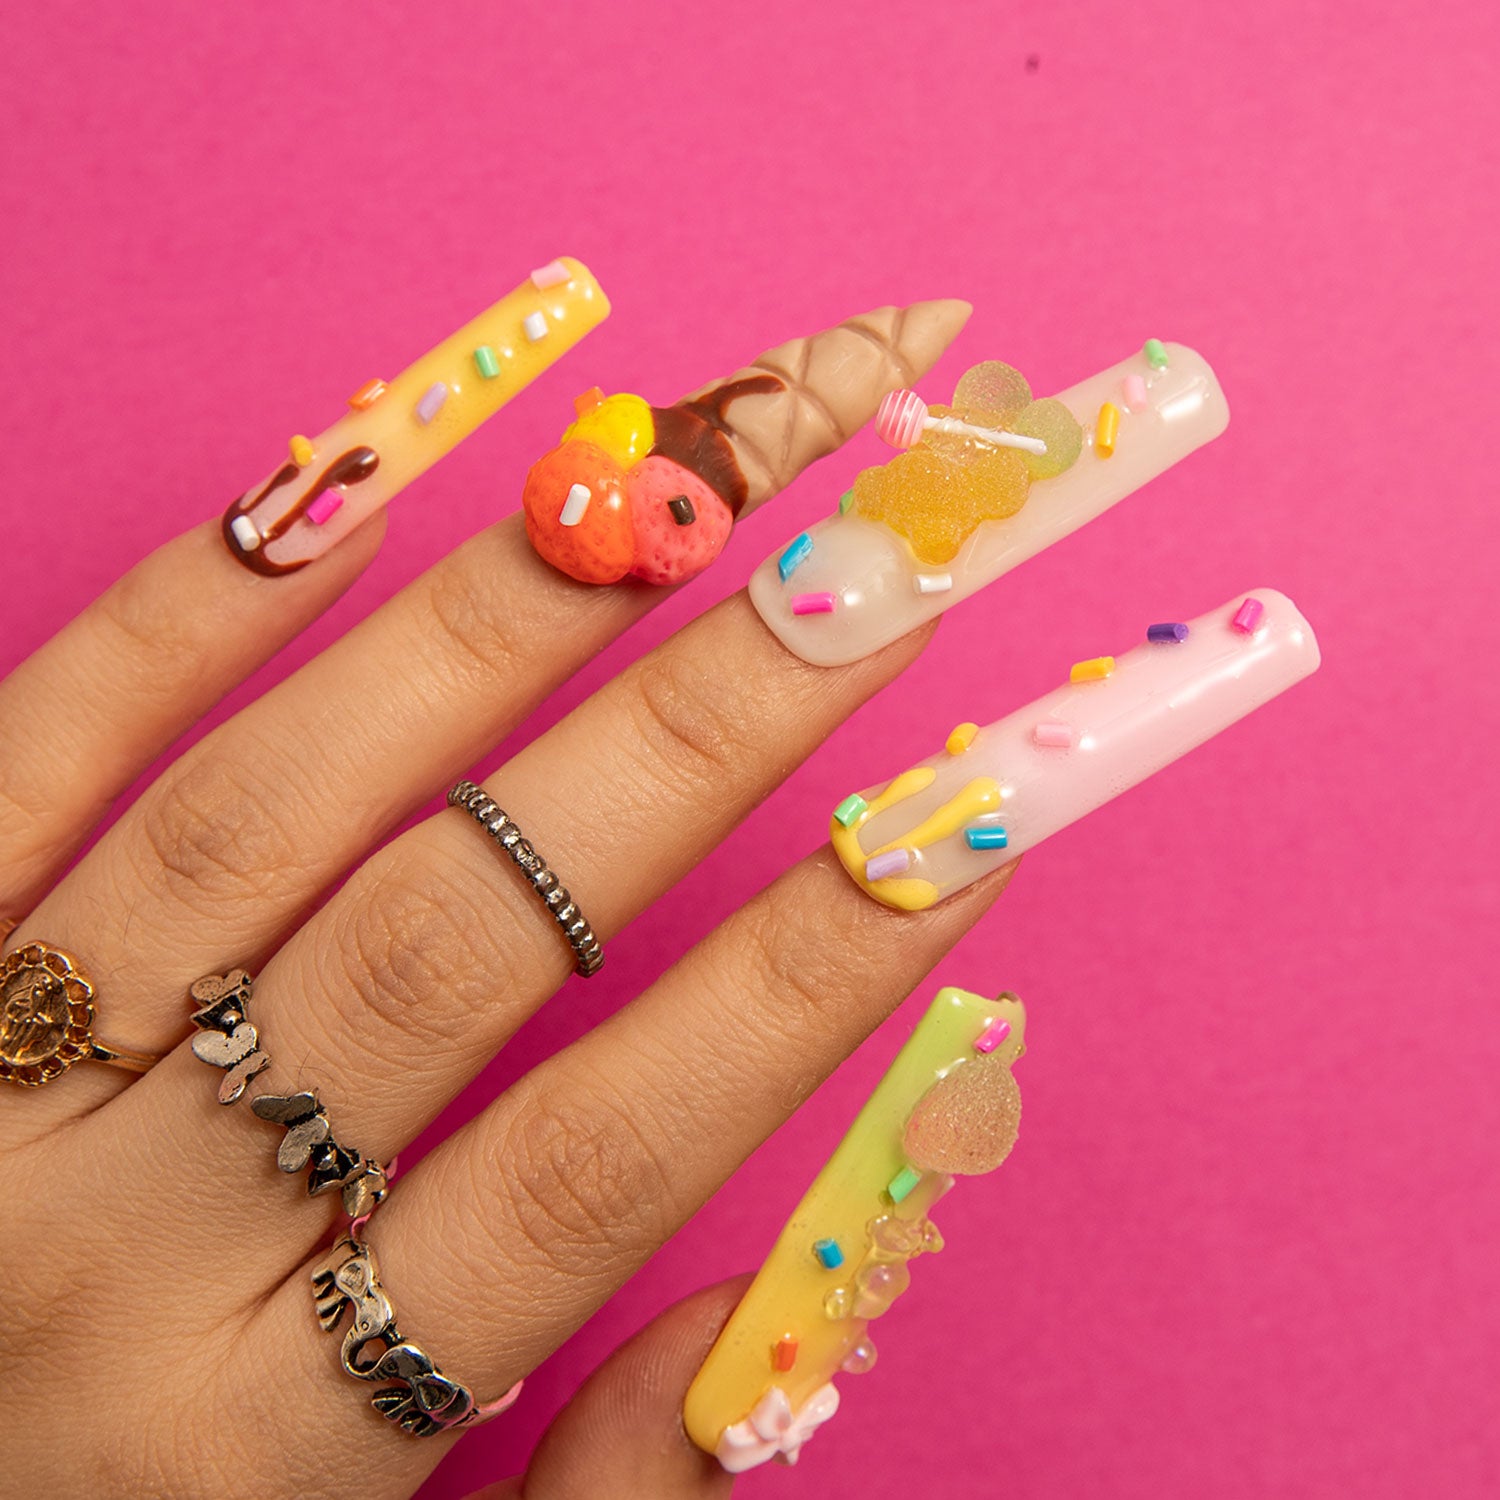 Square-shaped 3D decorated press-on nails with sprinkles, candy canes, and mini ice cream cones on a hand against a pink background